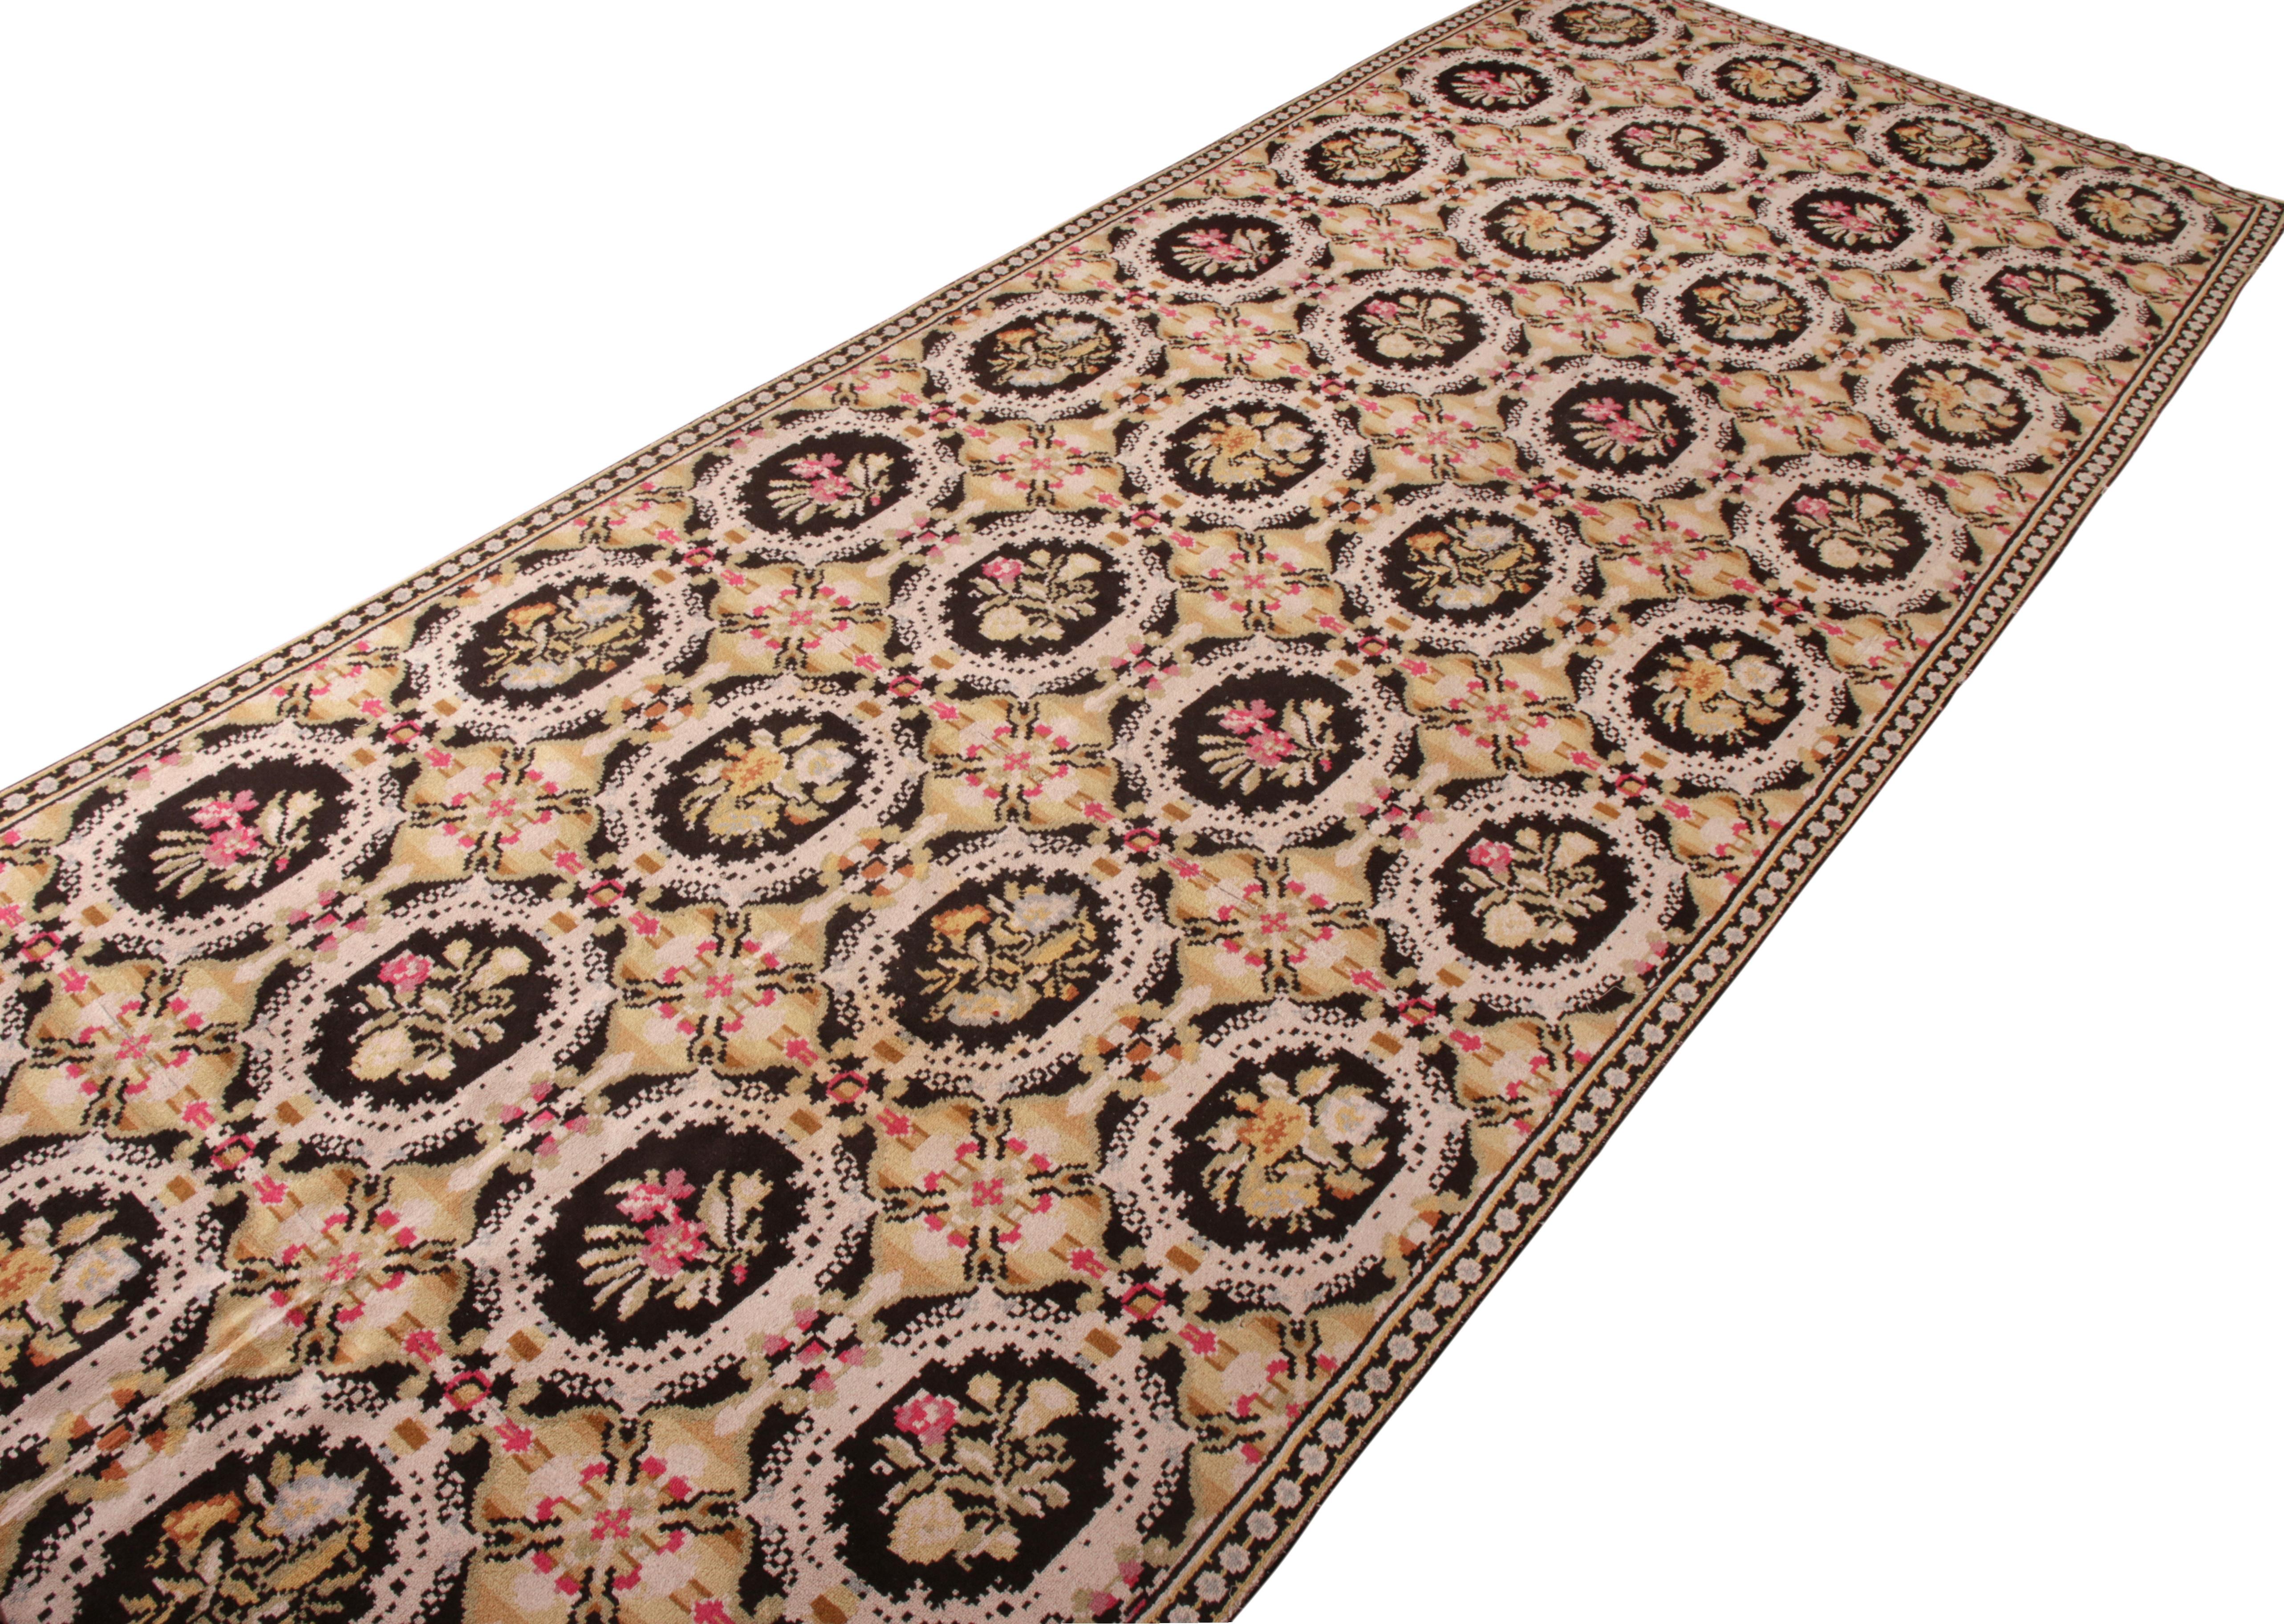 Handwoven in the United States circa 1950-1960, this large size vintage wilton carpet is an ode to the idyllic European style. Handwoven in wool in a phenomenal 8 x 27 size uncommon to its line, the piece makes the most of the frame with an all over